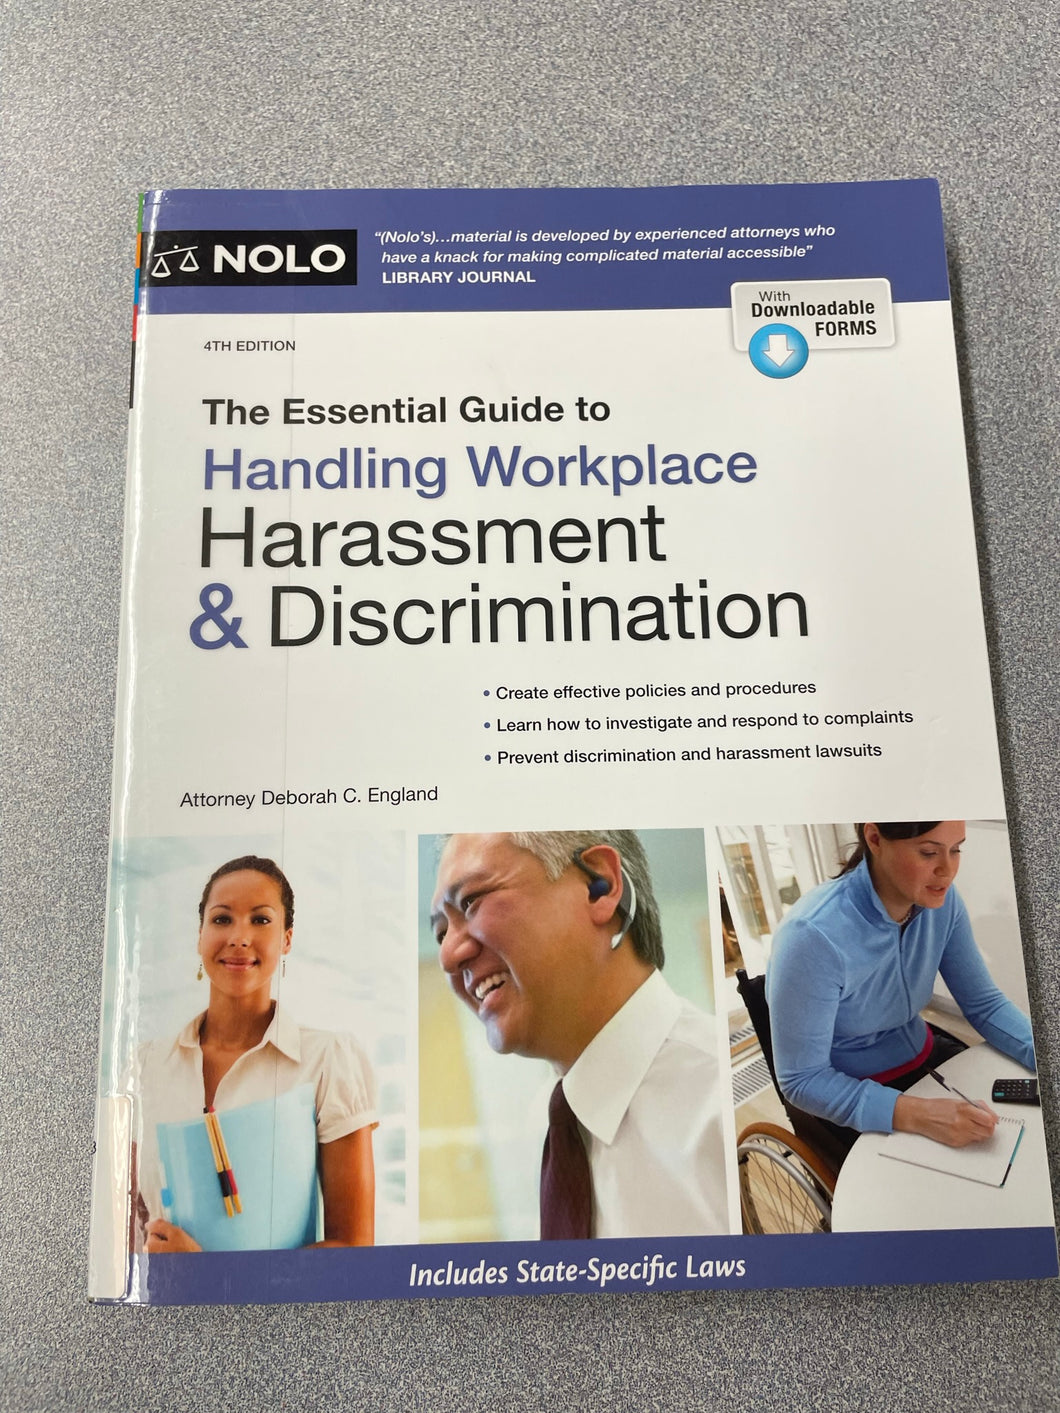 The Essential Guide to Handling Workplace Harassment and Discrimination, 4th Edition, England, Deborah C. [2018] LAW 10/22